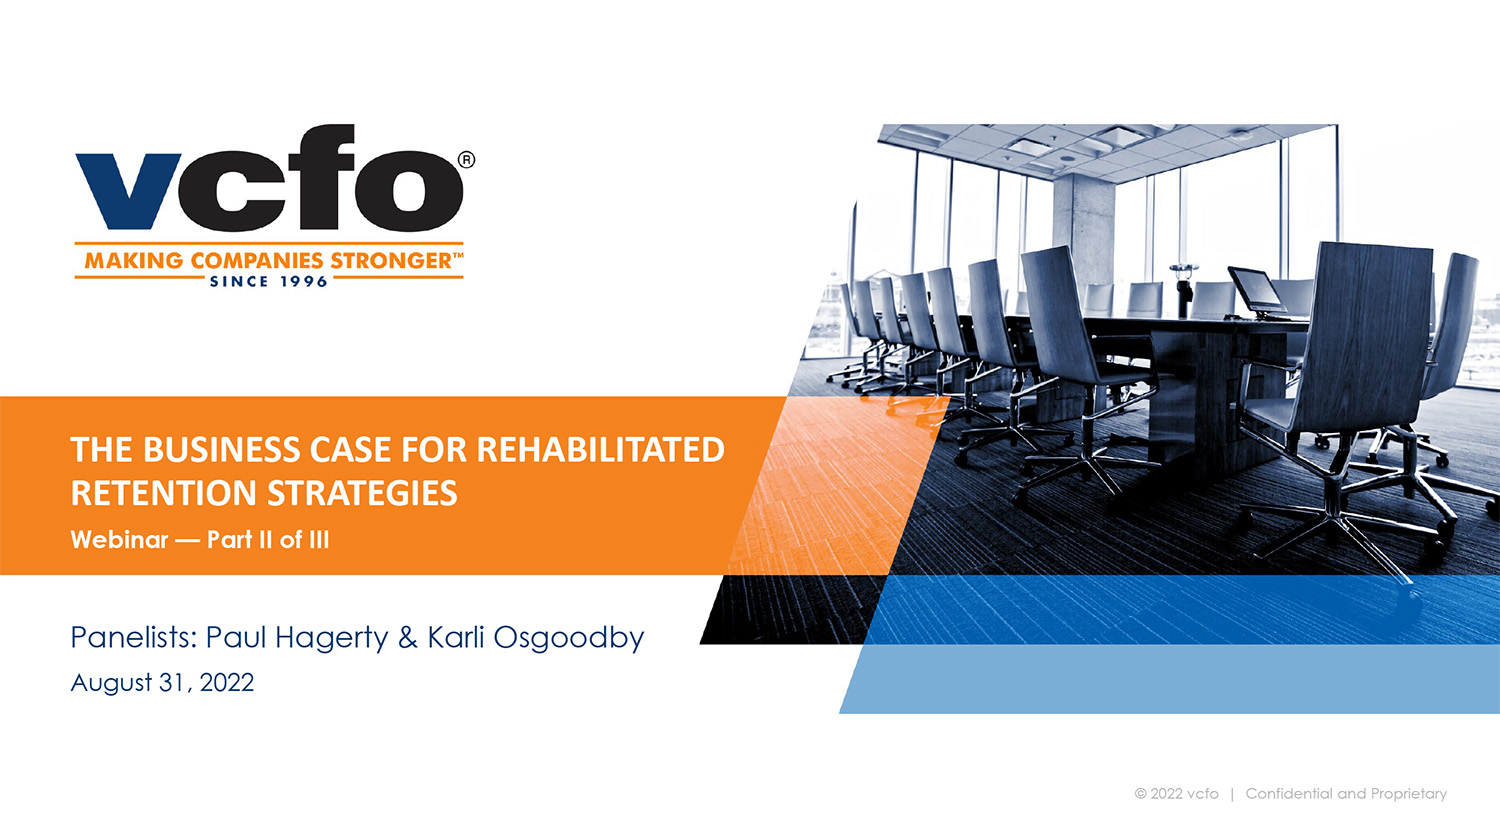 The Business Case for Rehabilitated Retention Strategies